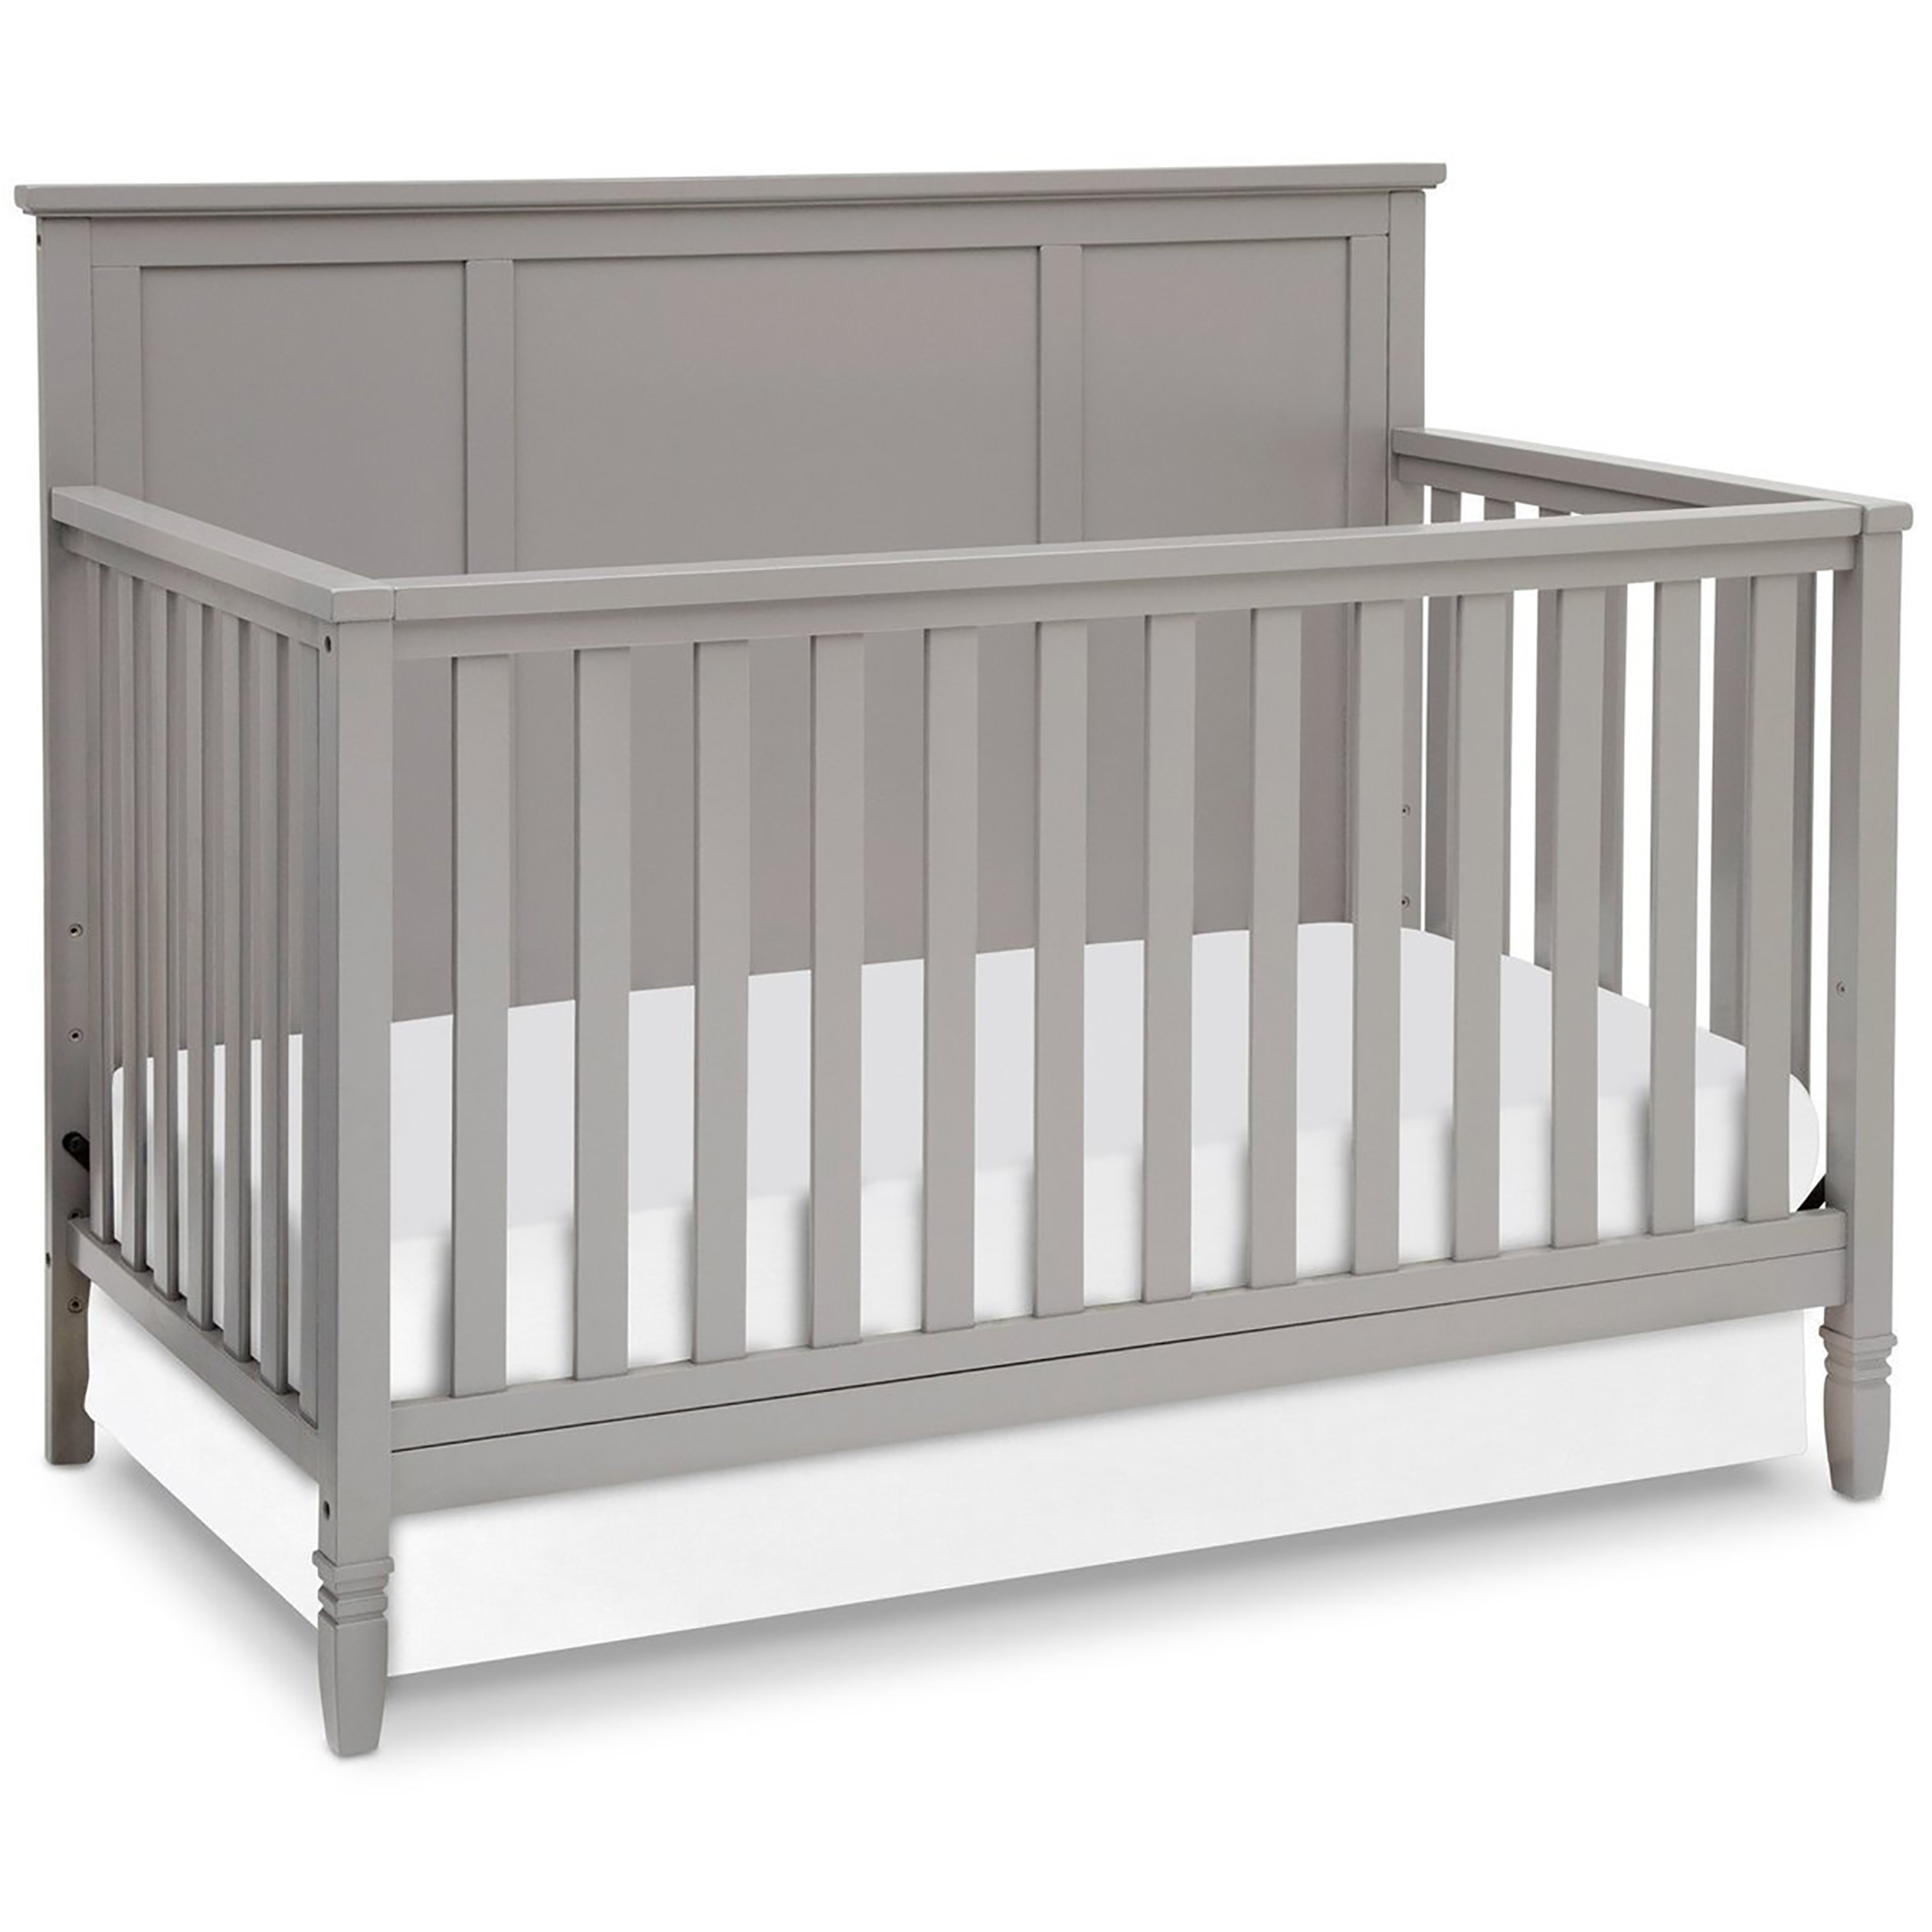 Delta Children Epic 4-in-1 Convertible Crib, Greenguard Gold Certified, Gray - image 1 of 8